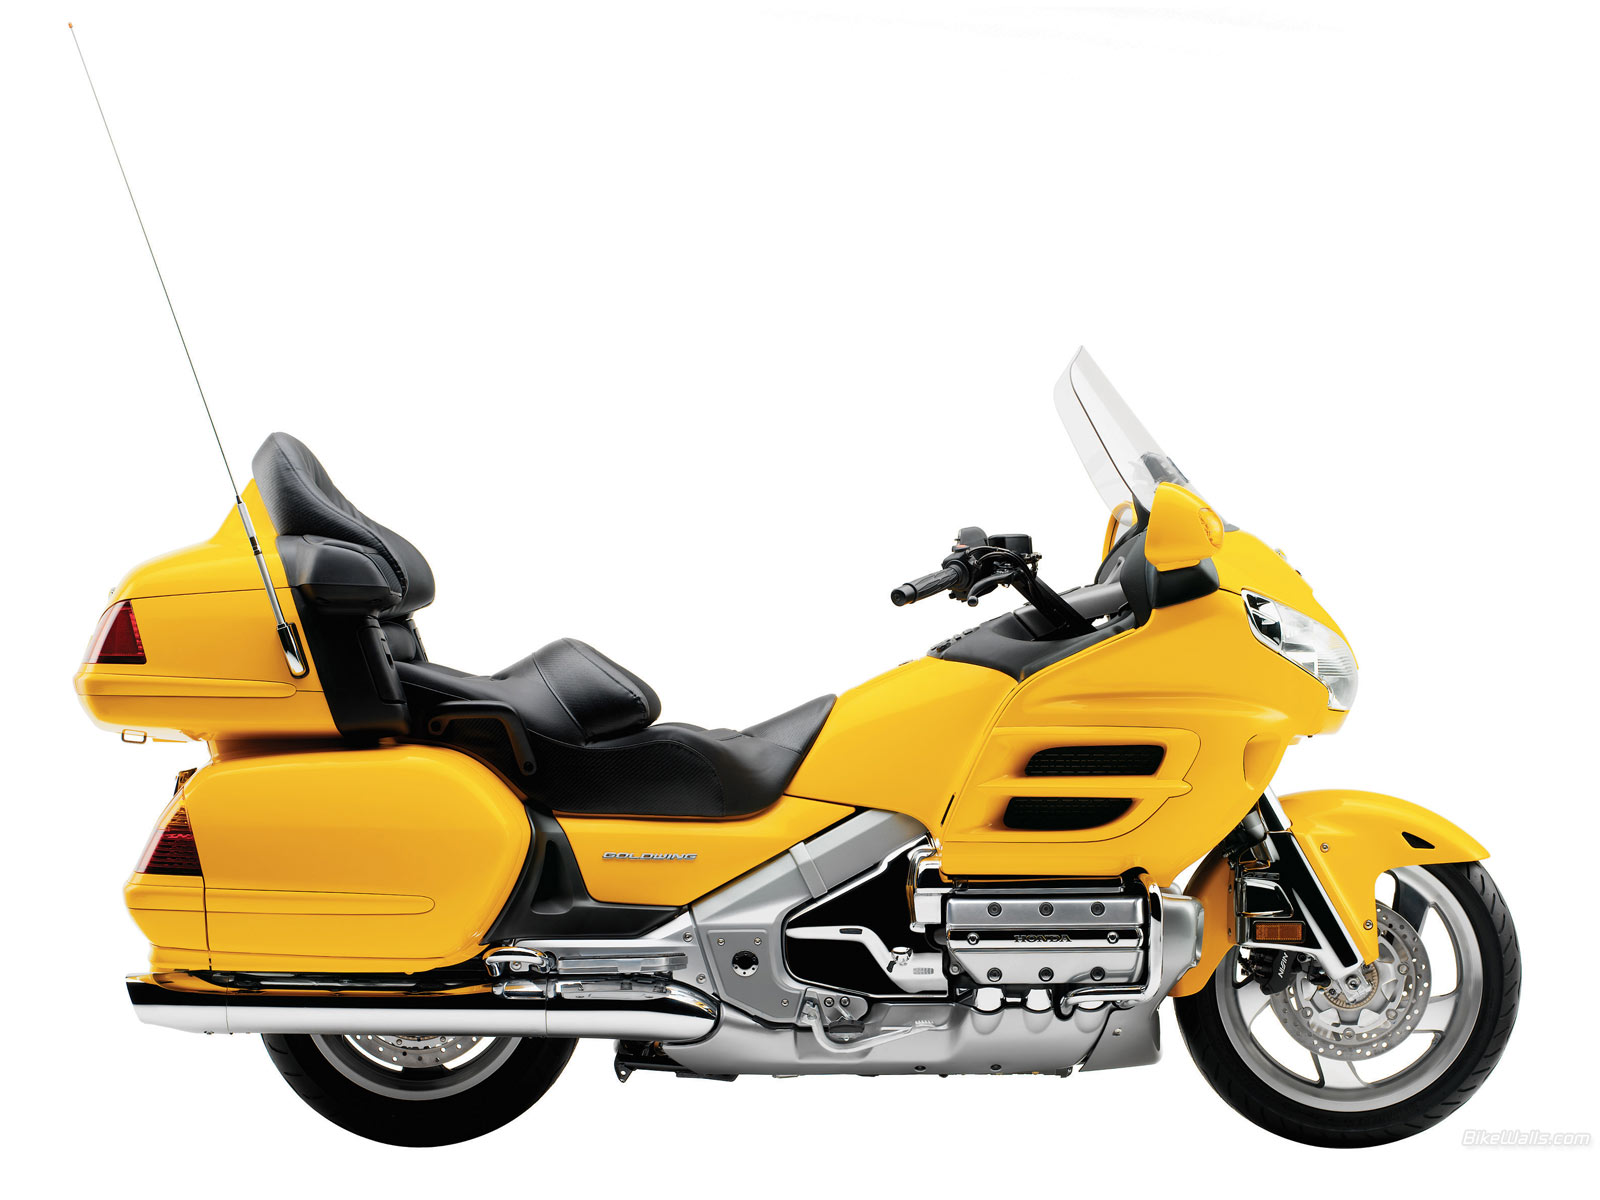 Honda Gold Wing 1600x1200 c297 Tapety na pulpit